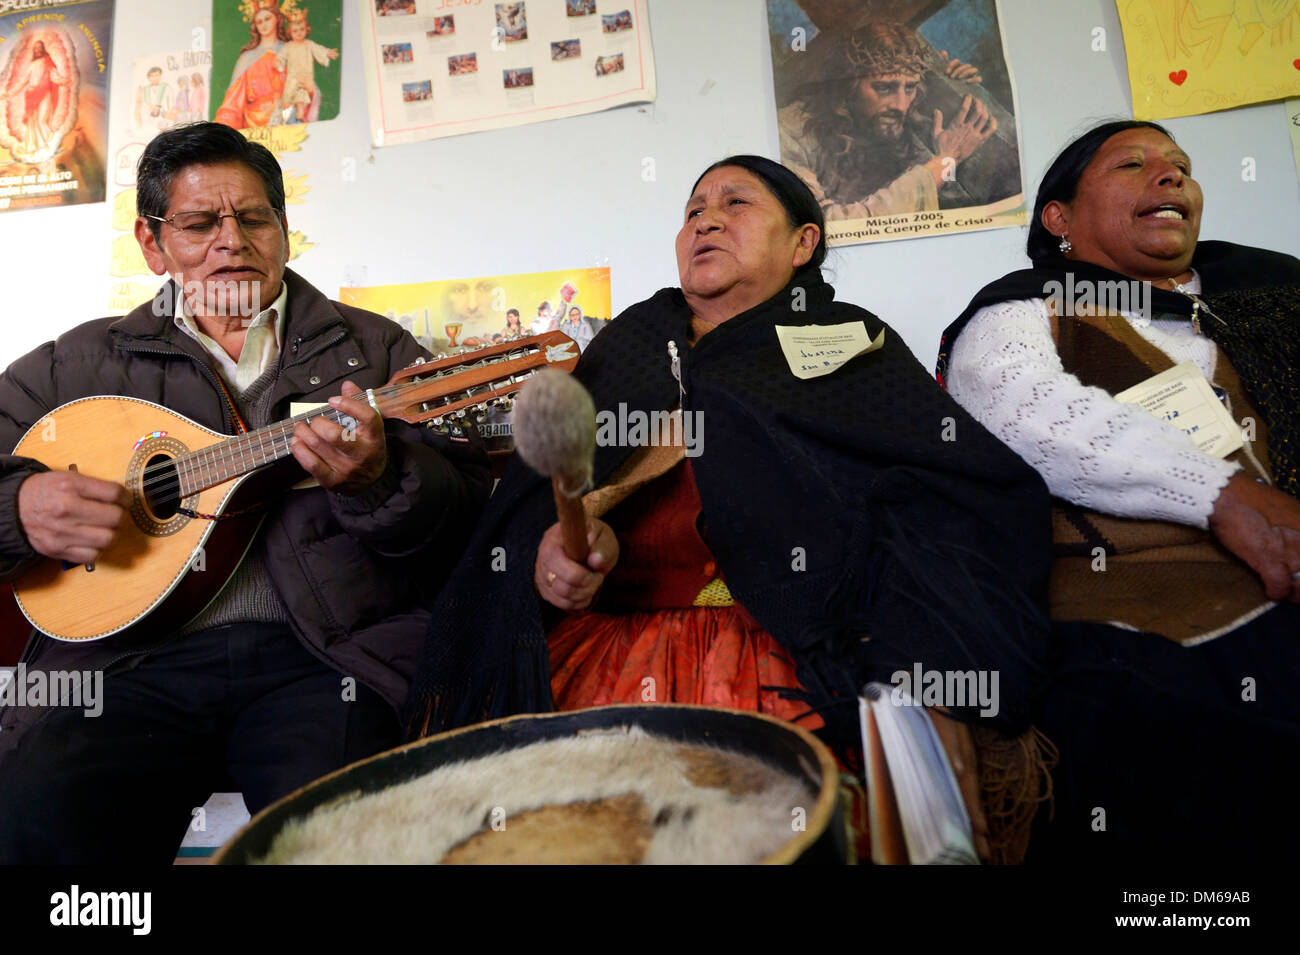 Catholic base community, Bolivians in the traditional dress of the Quechua Indians making music and singing together, El Alto Stock Photo